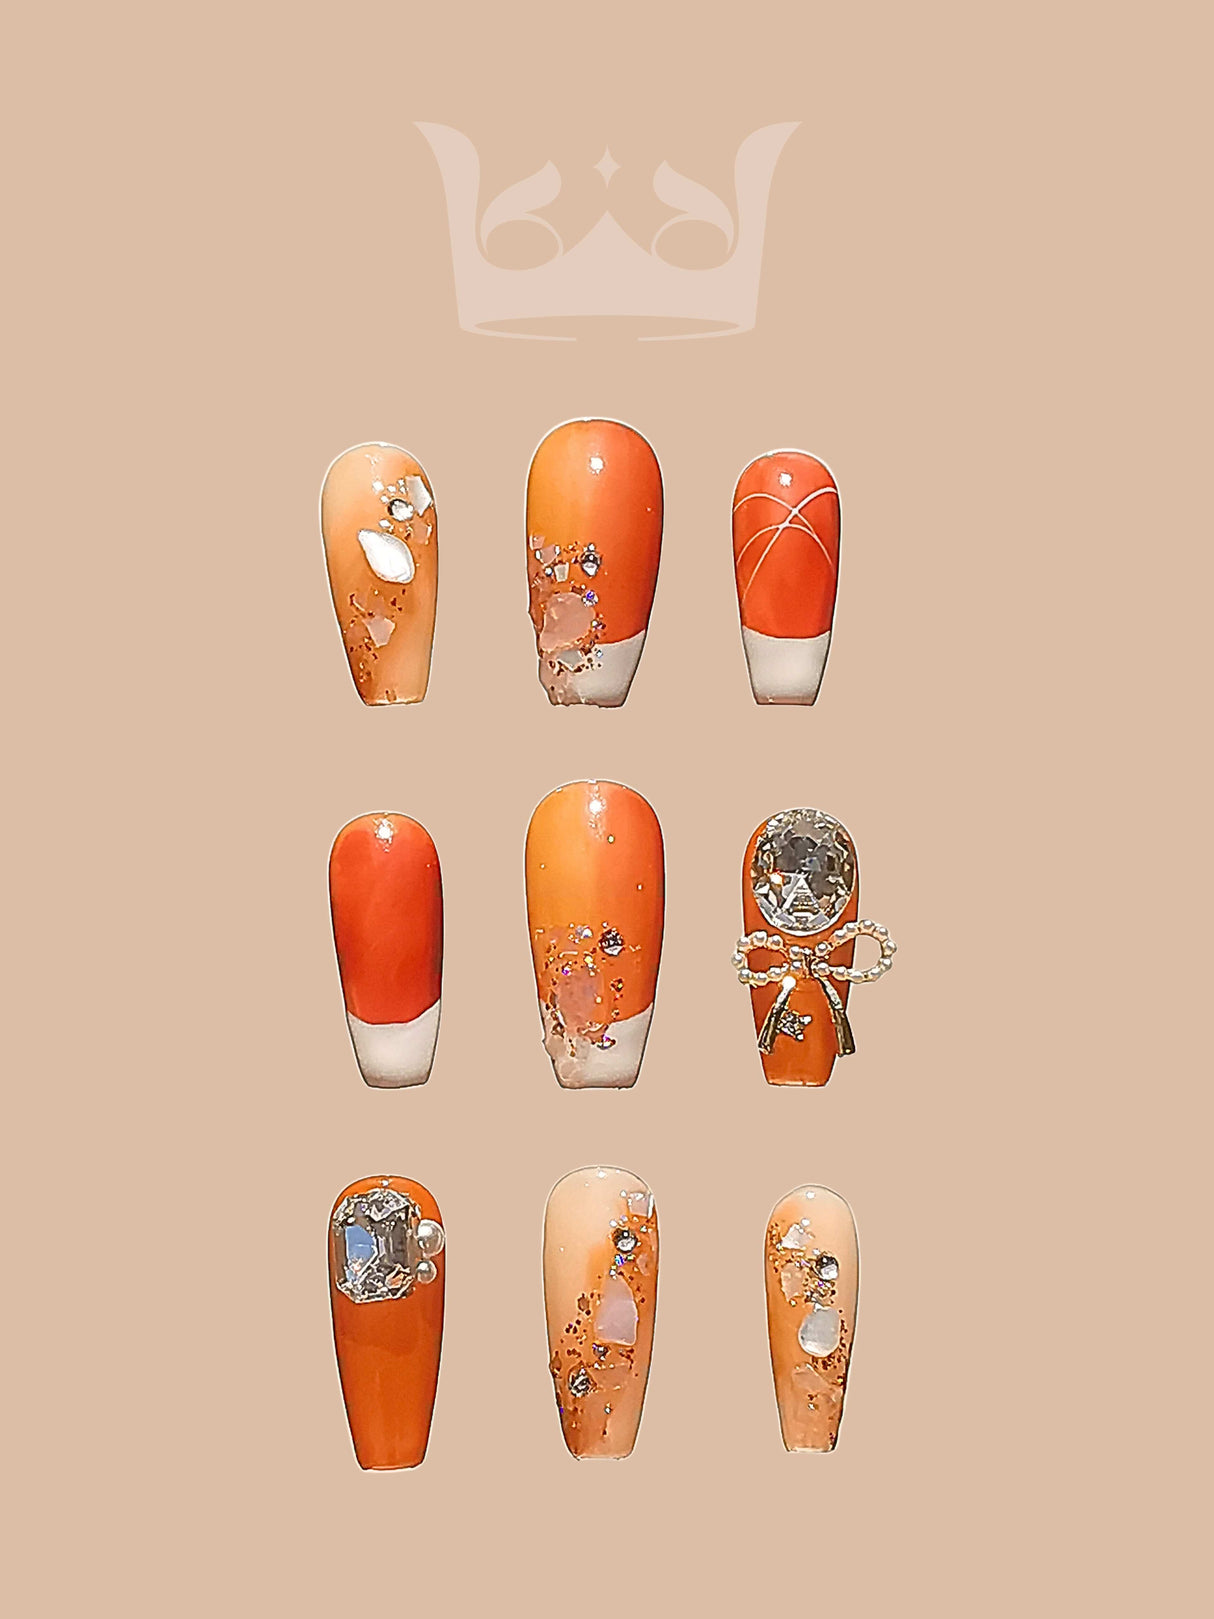 These press-on nails are perfect for a bold and glamorous look with orange and peach tones, floral motifs, glitter accents, and rhinestone embellishments.